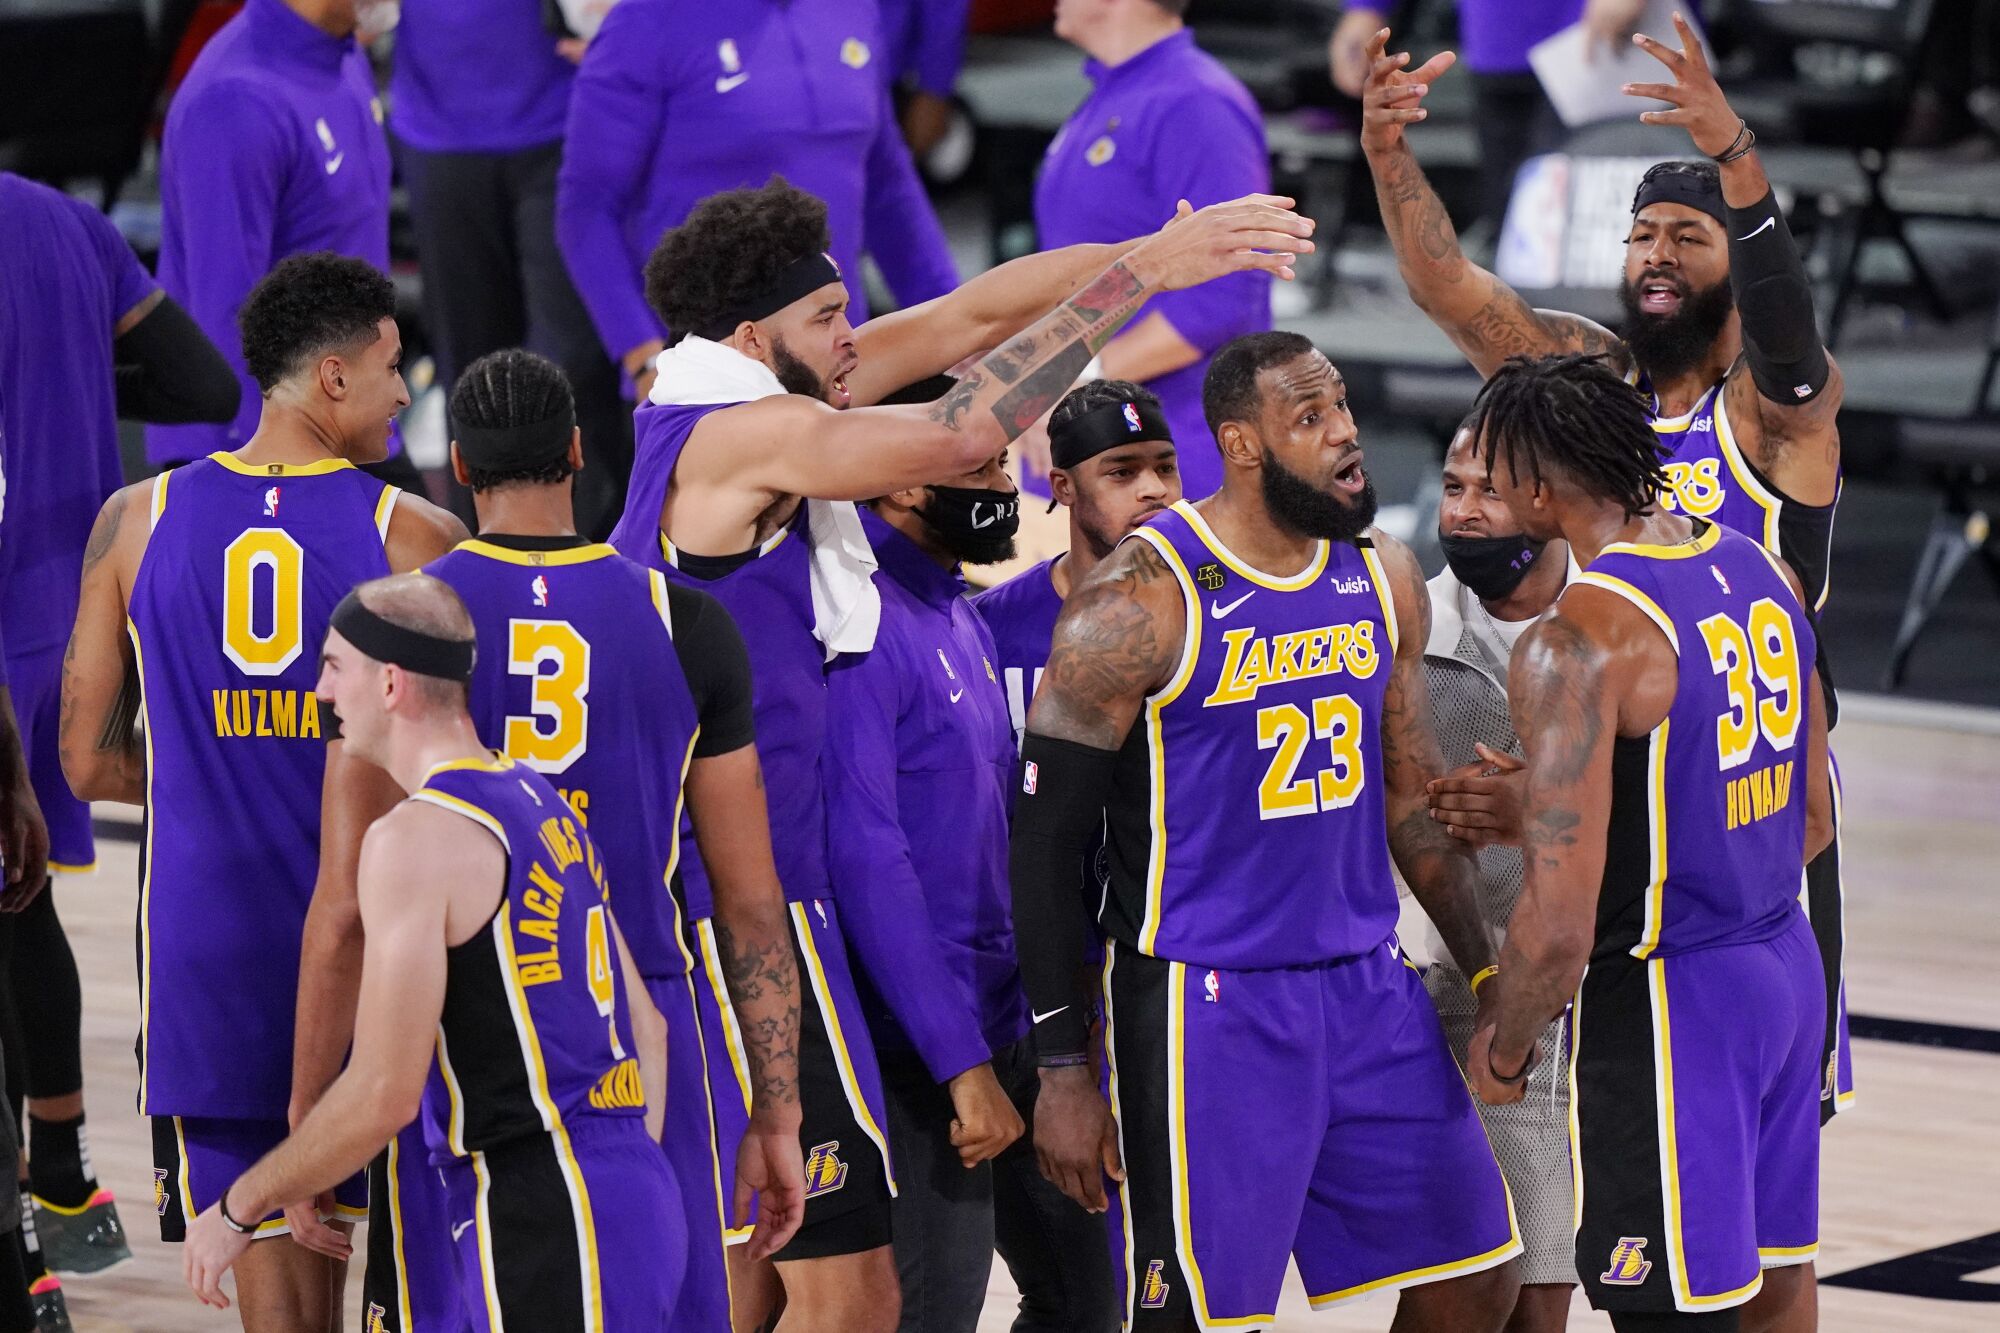 The Lakers celebrate after winning Game 5.